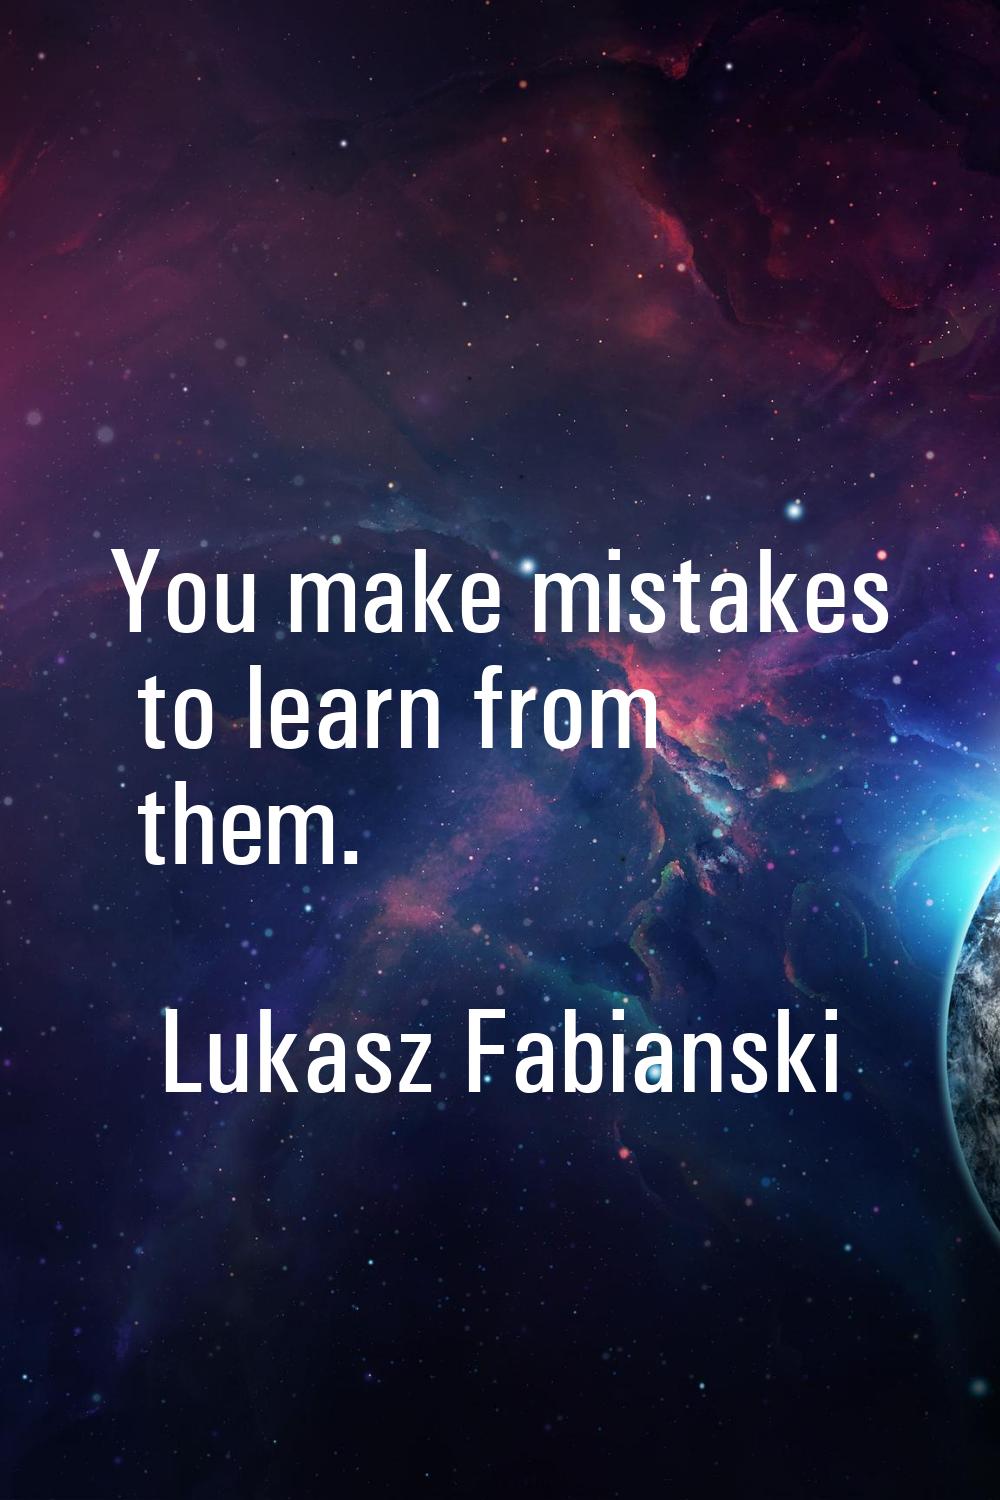 You make mistakes to learn from them.